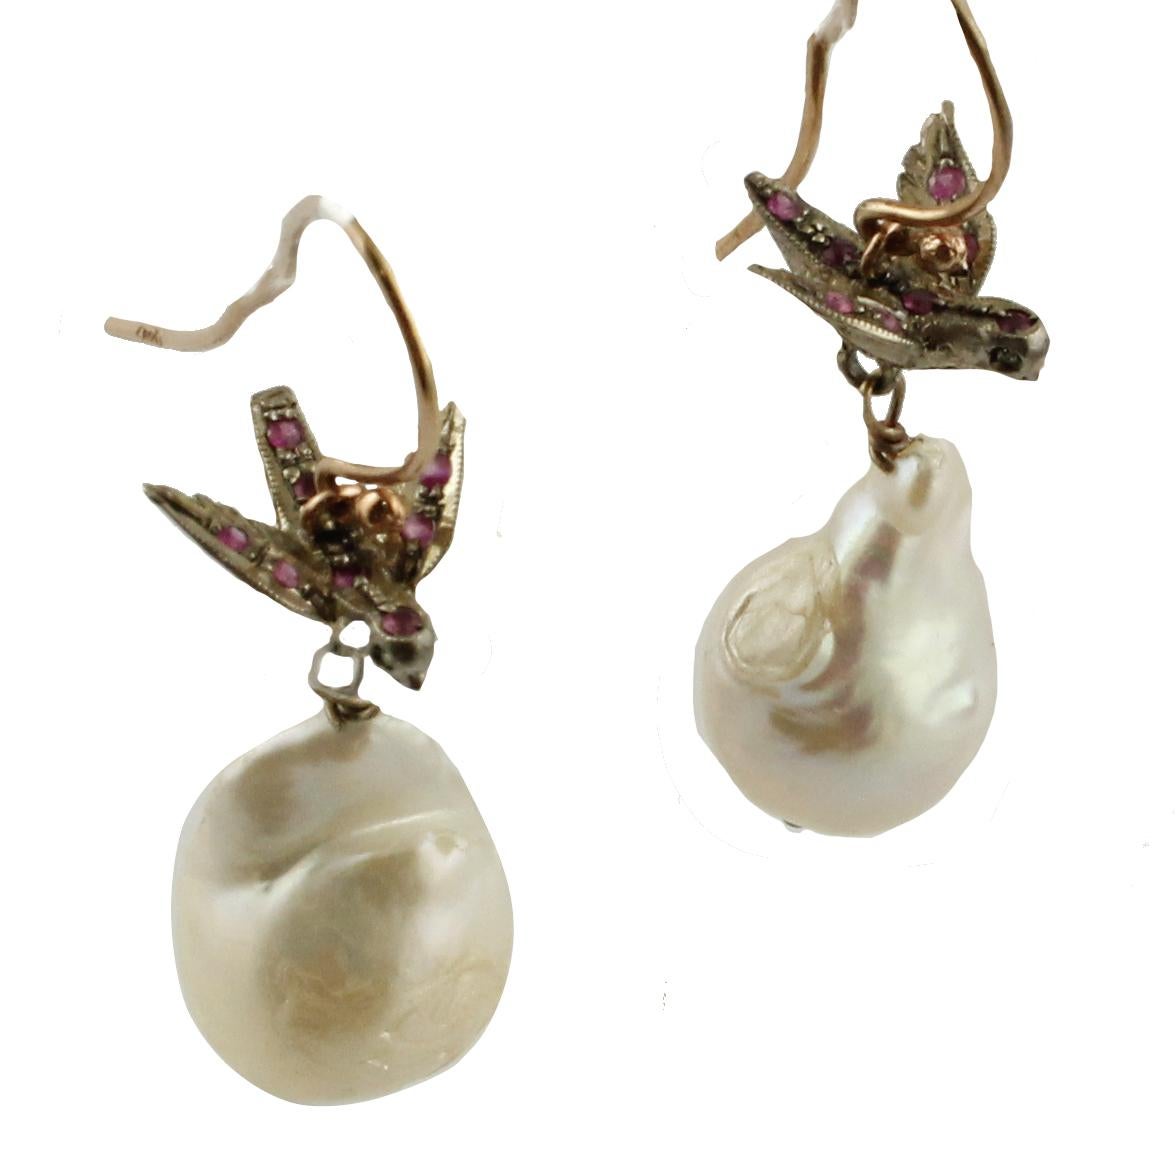 Dangle earrings in 9K rose gold and silver structure composed of birds studded by little rubies on the body and diamonds like eyes at the top, at the bottom there are two white irregular pearls.
Diamonds 0.01 ct 
Rubies 0.64 ct 
Pearls 7.10 g    1.9